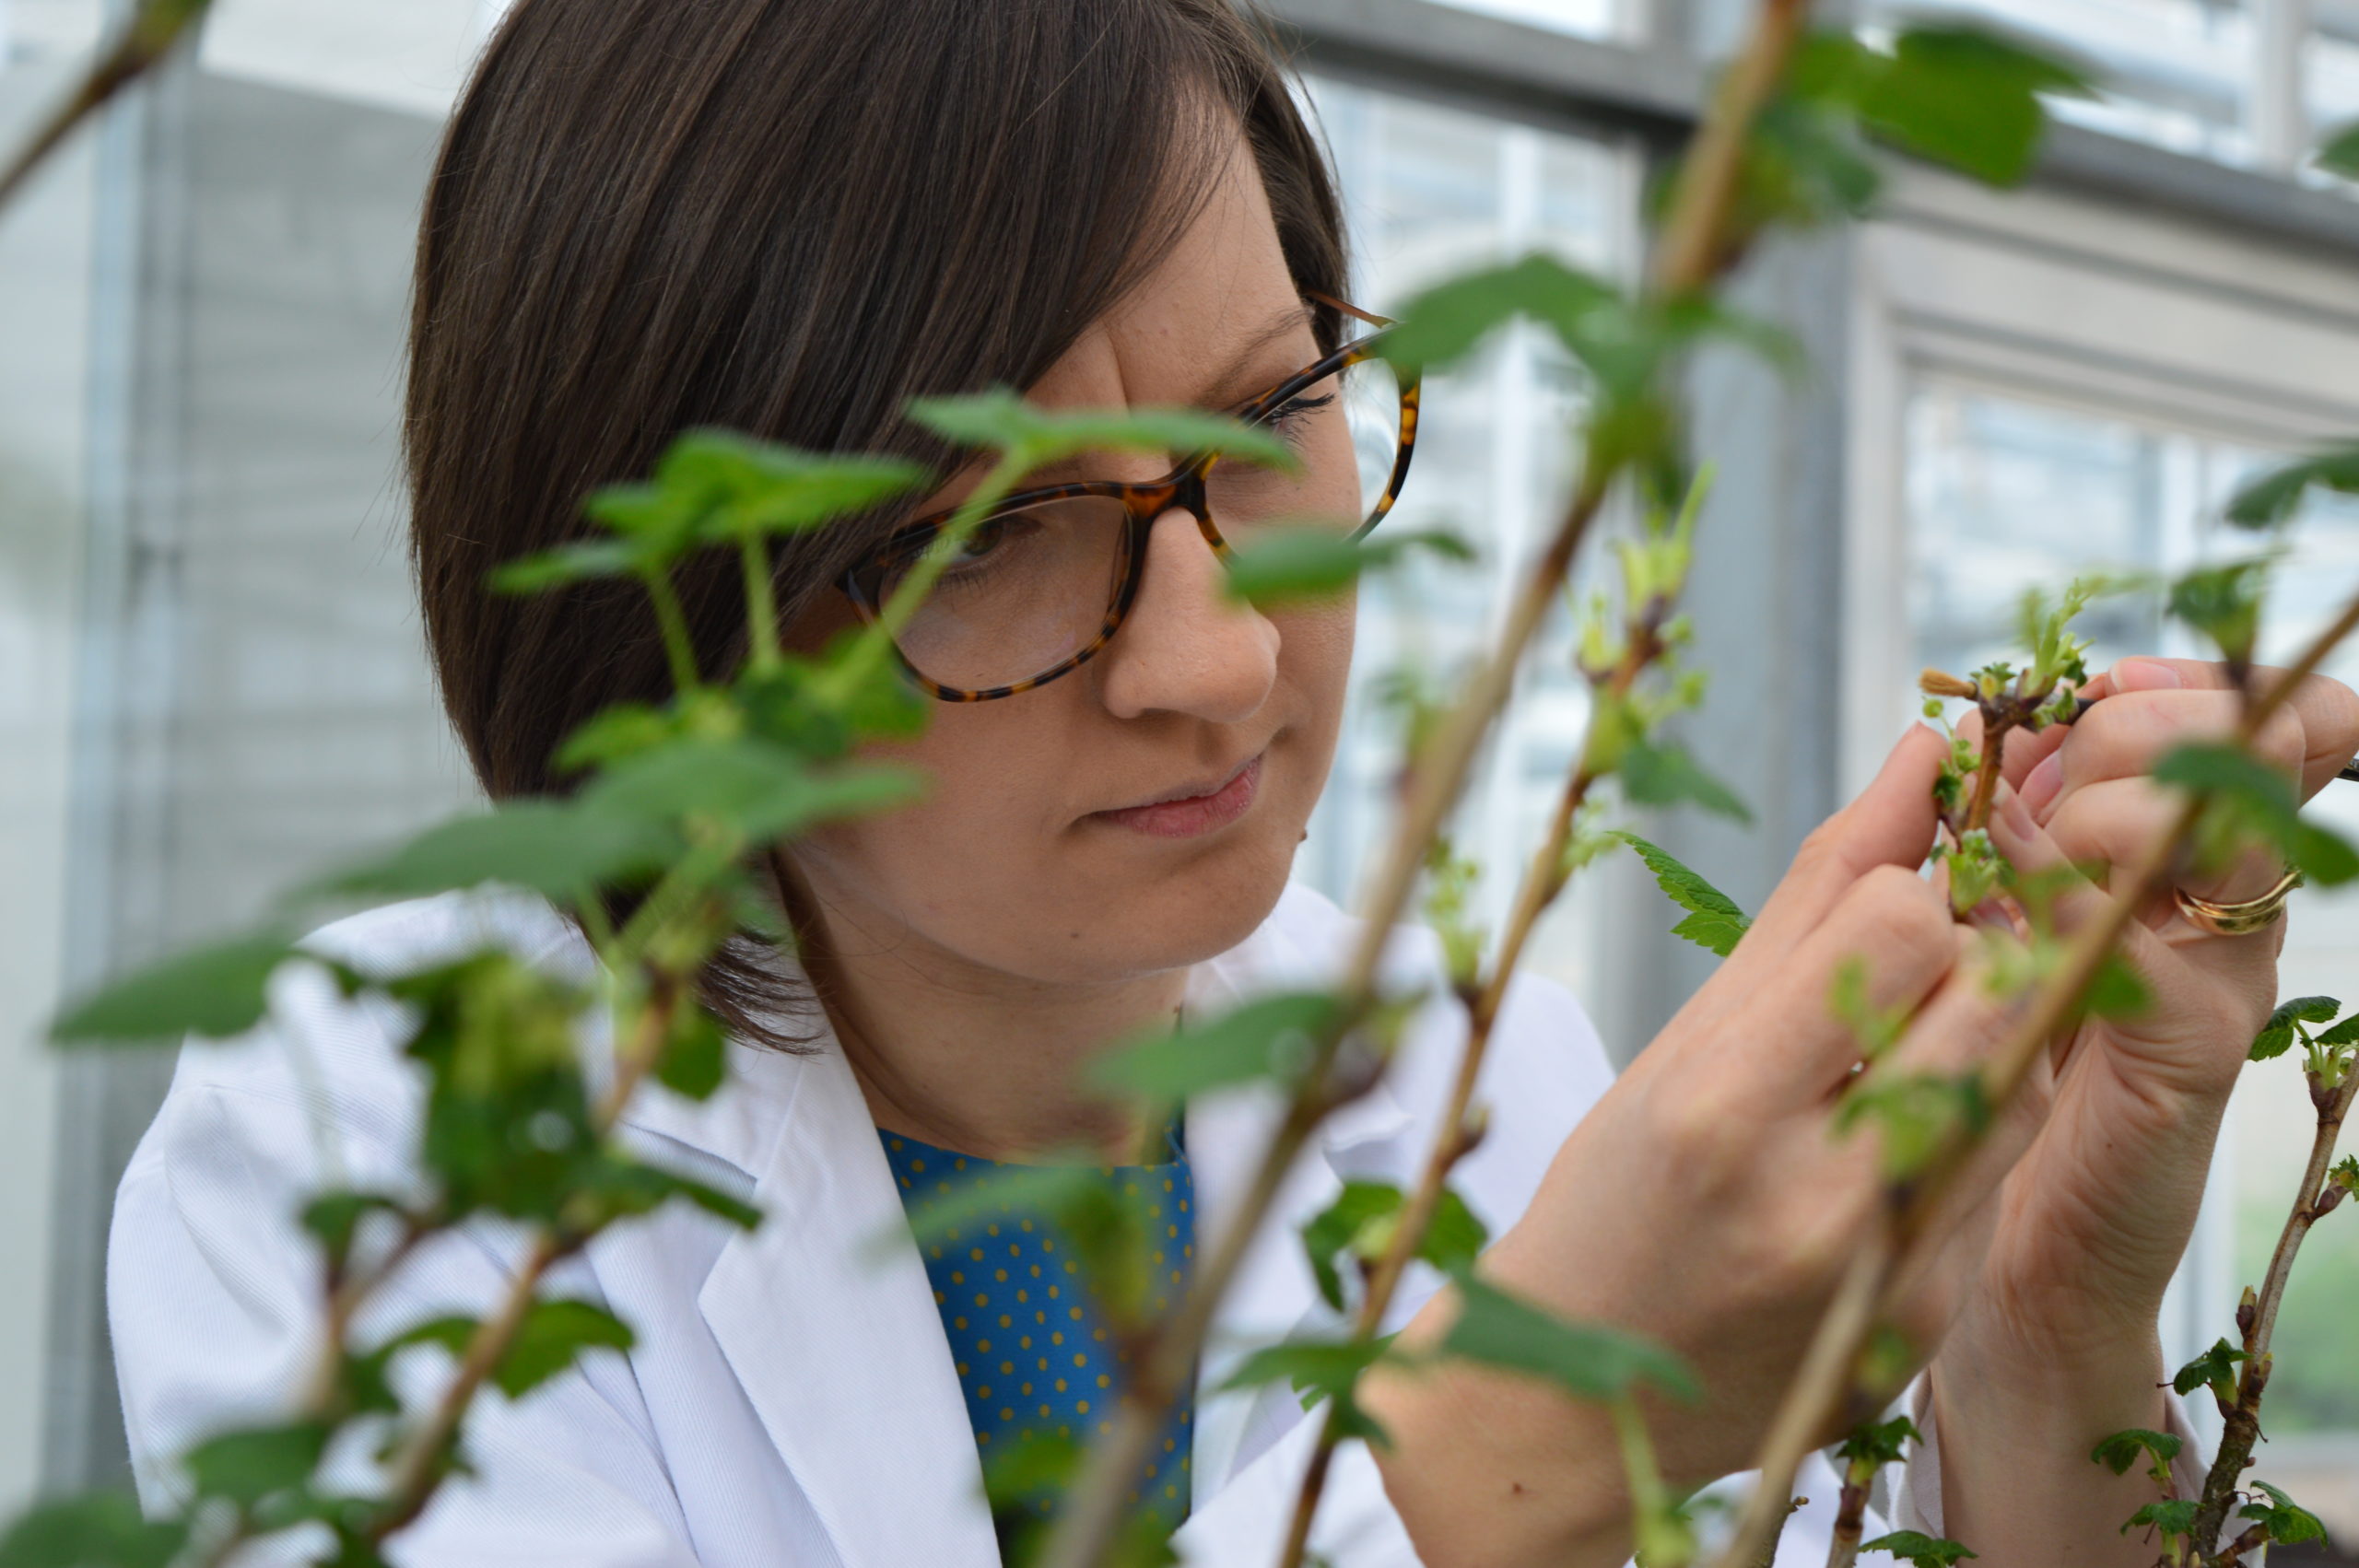 variety research: Dr Dorota Jarret, blackcurrant breeder, looking closely at a young blackcurrant plant